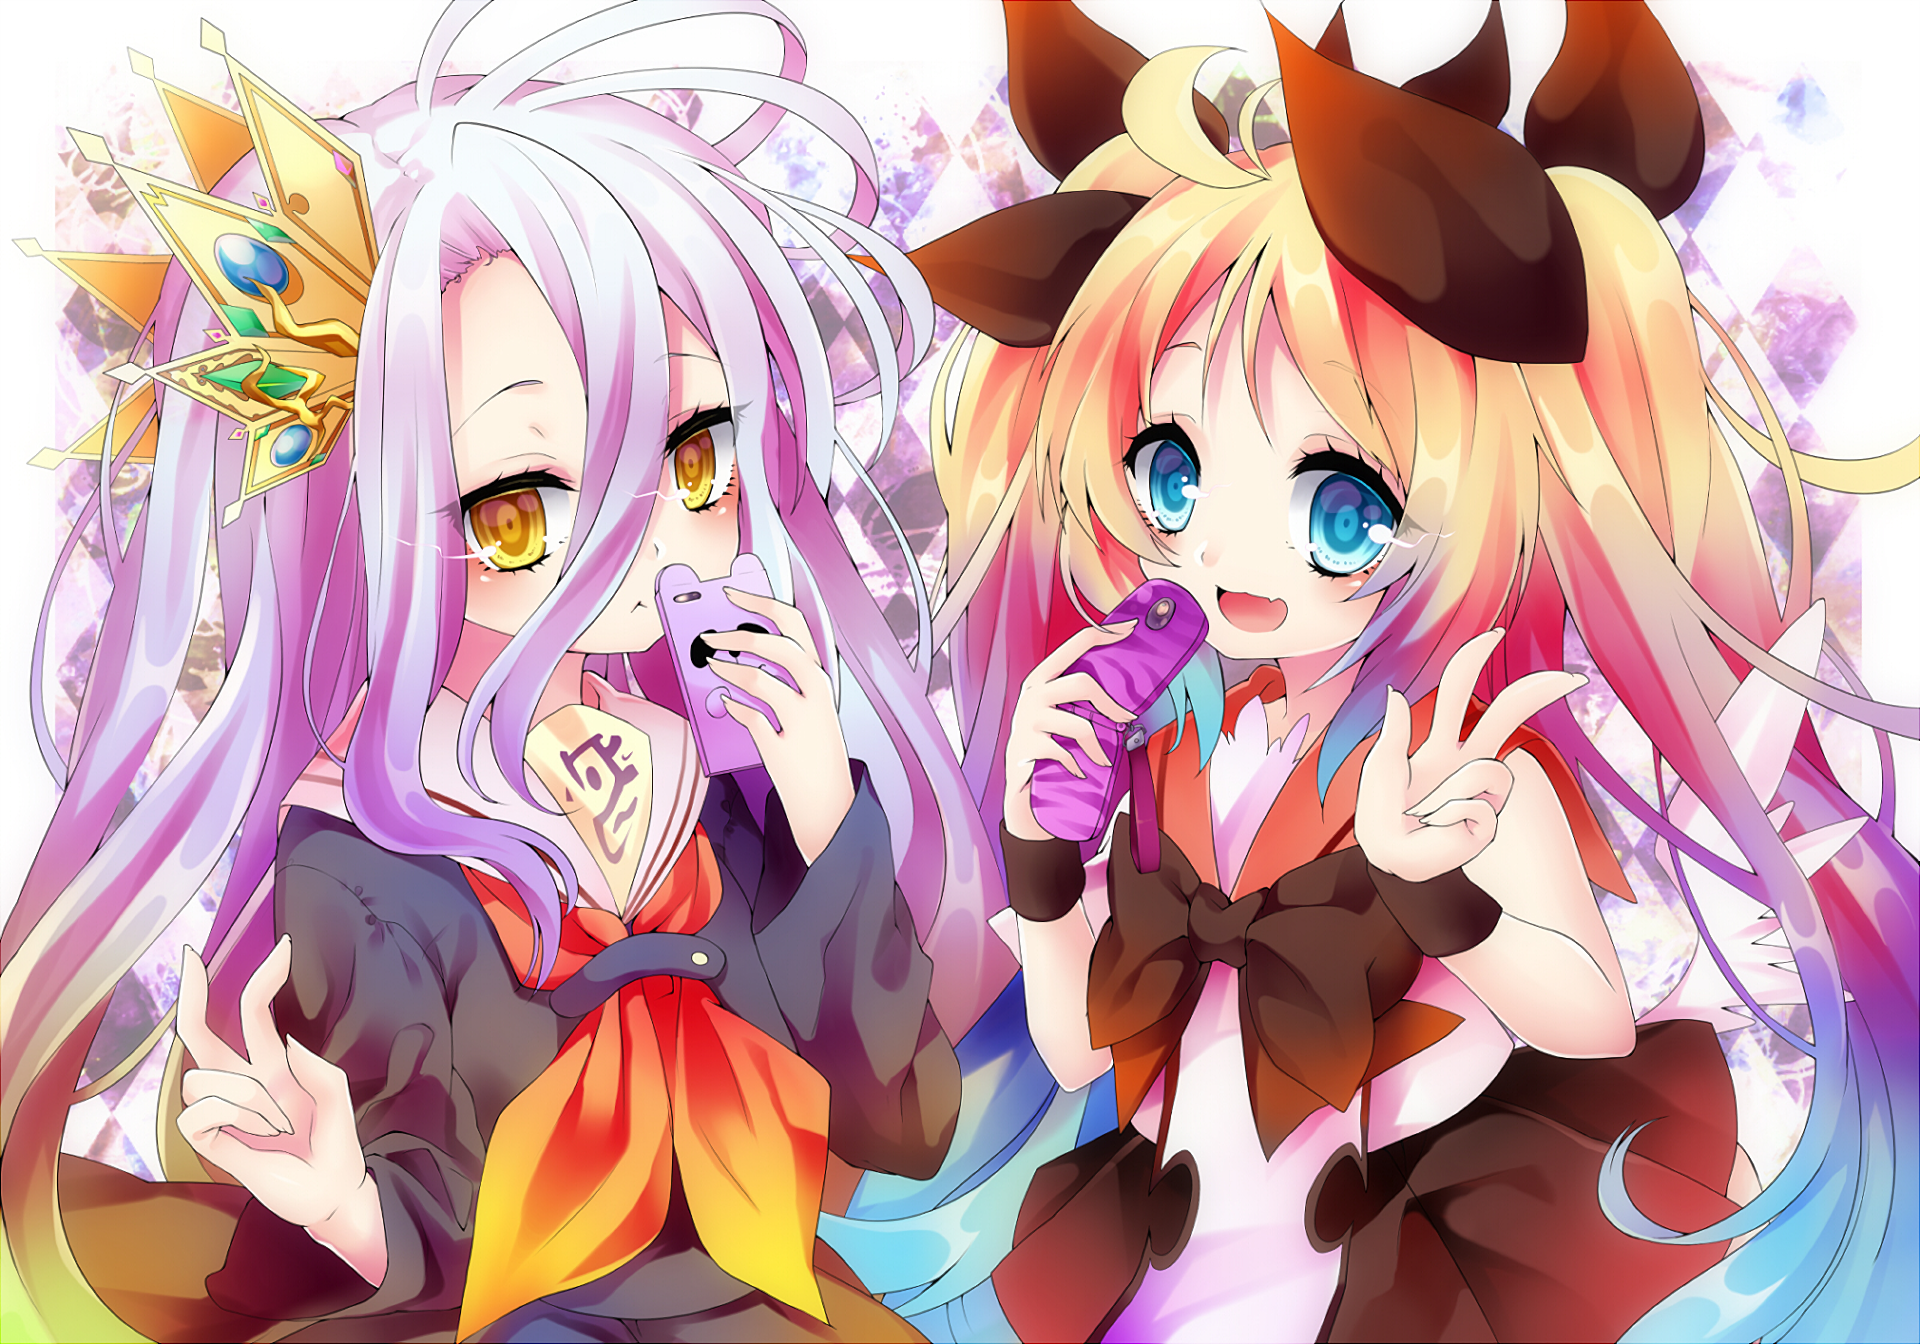 Greed Packet Unlimited No Game No Life Nokia Greed Packet Unlimited Shiro No Game No Life 1920x1344